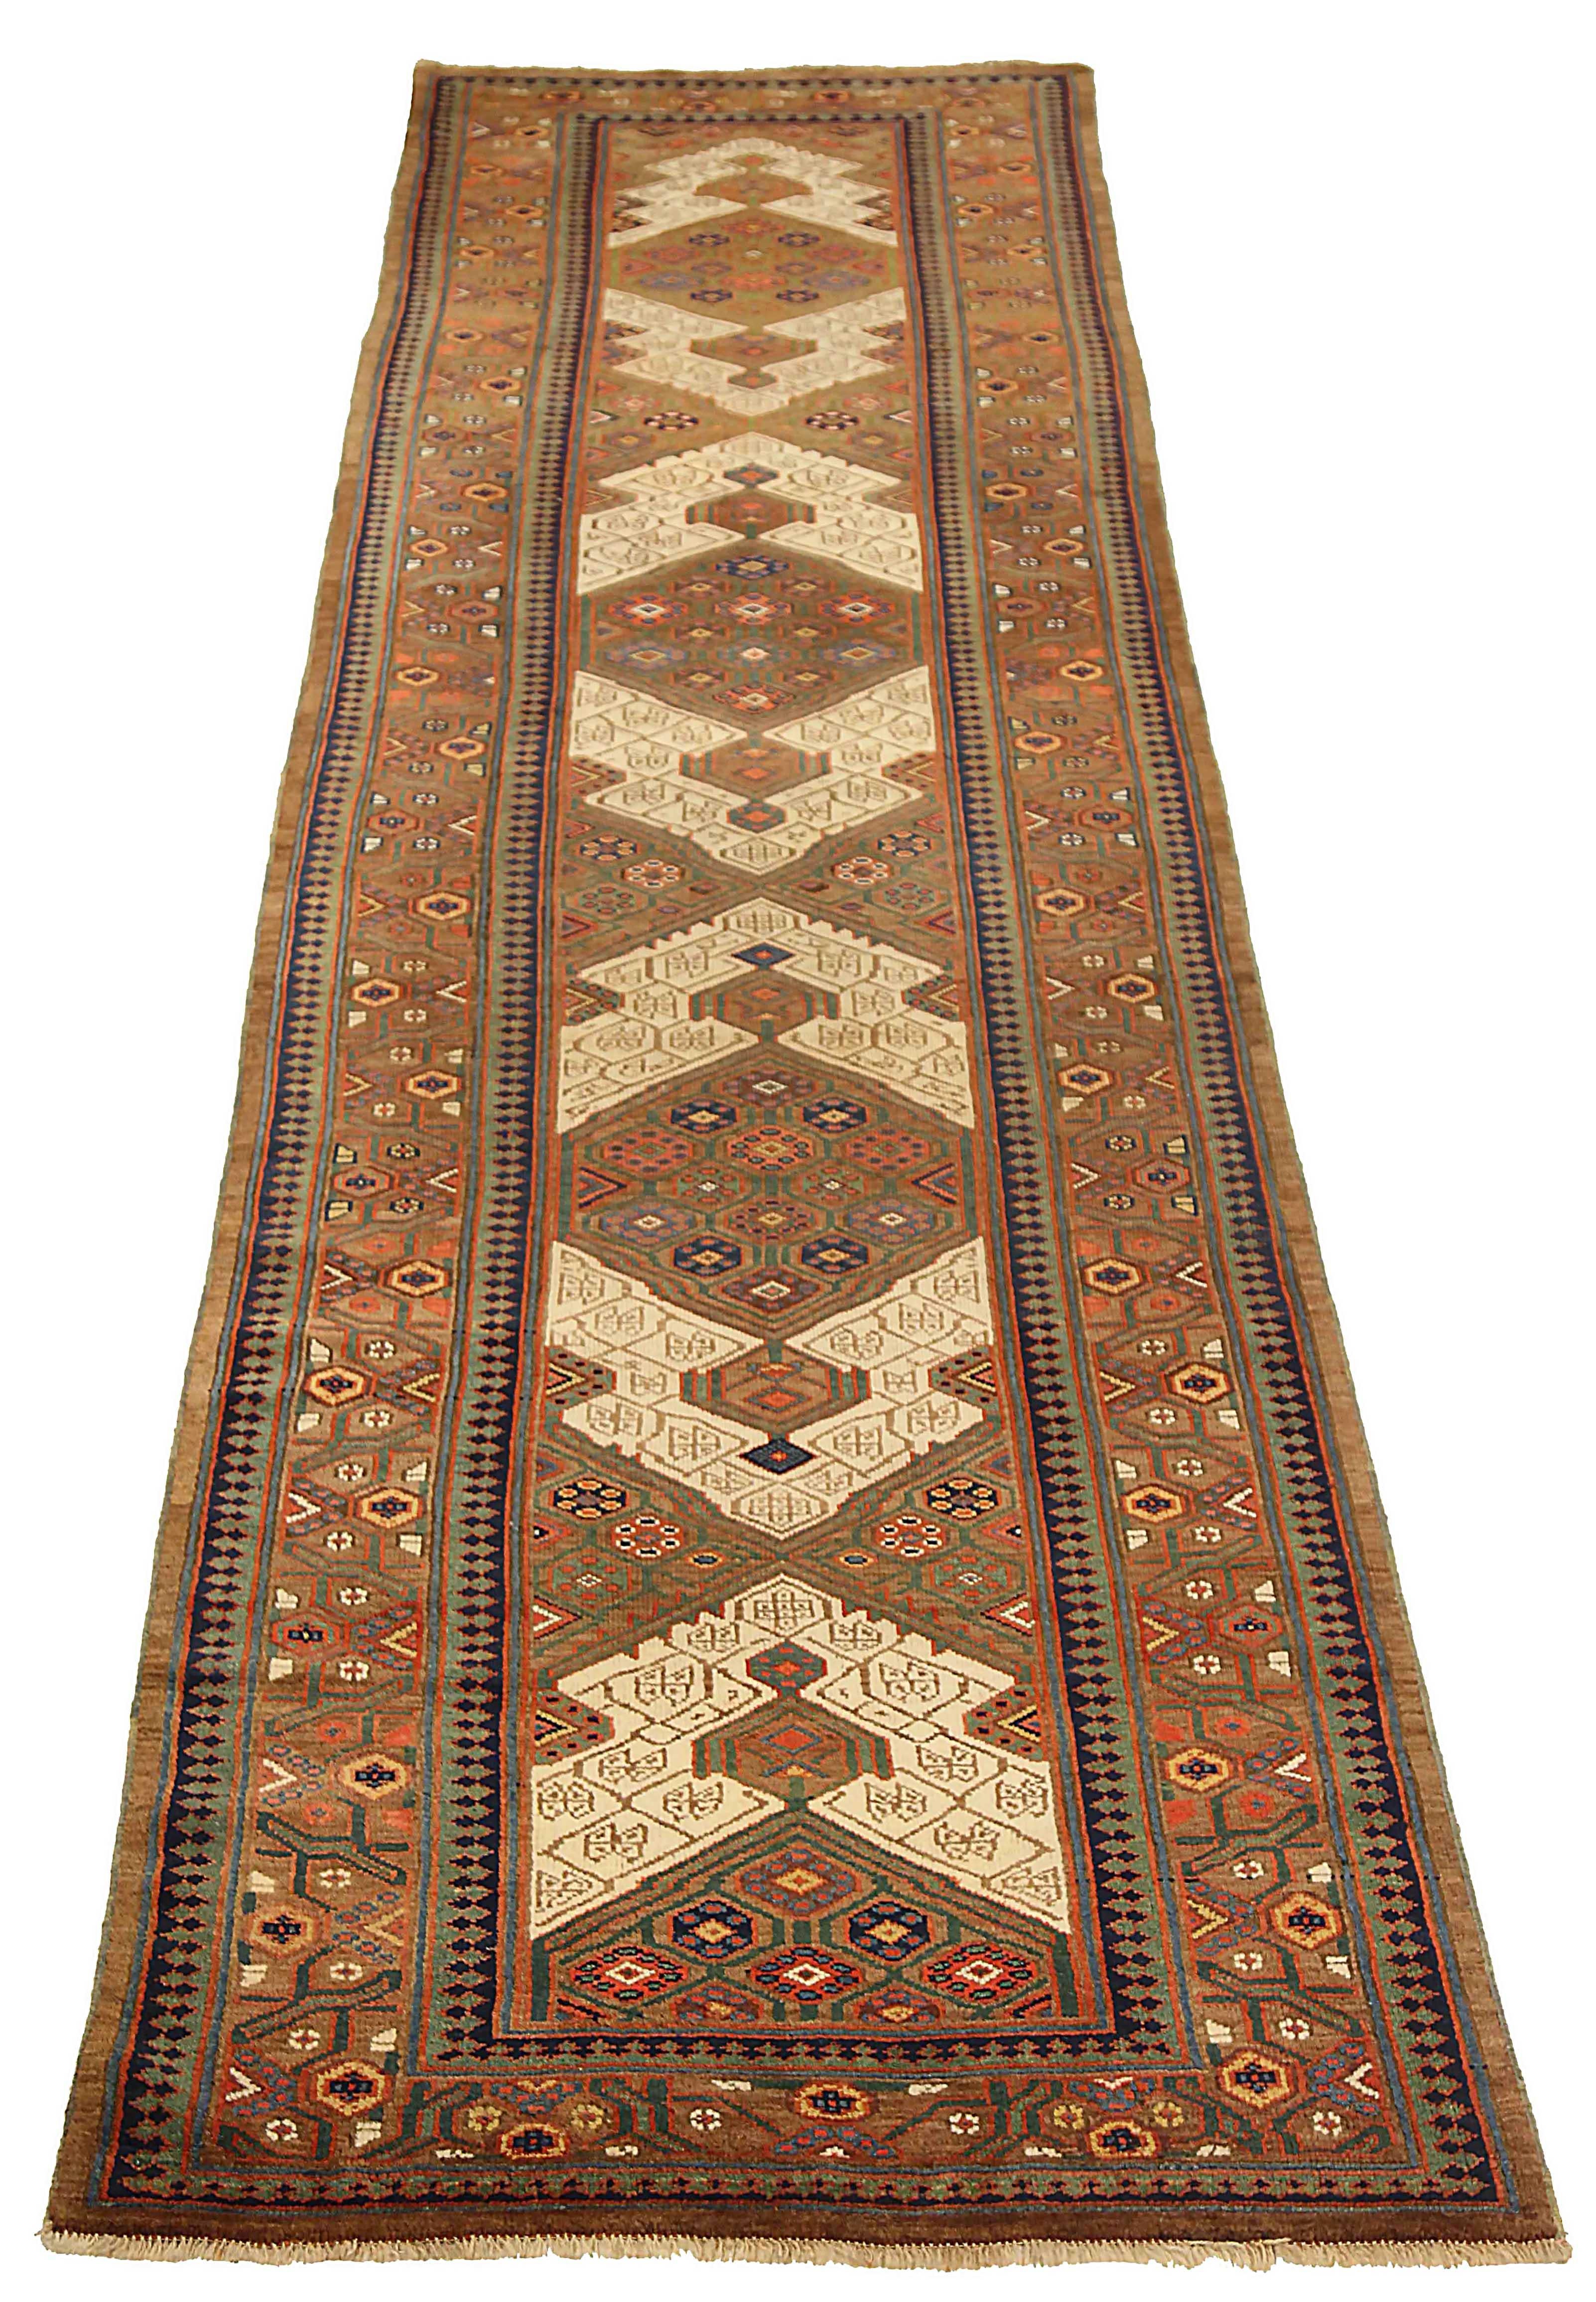 Antique Persian runner rug handwoven from the finest sheep’s wool. It’s colored with all-natural vegetable dyes that are safe for humans and pets. It’s a traditional Sarab design handwoven by expert artisans. It’s a lovely runner rug that can be